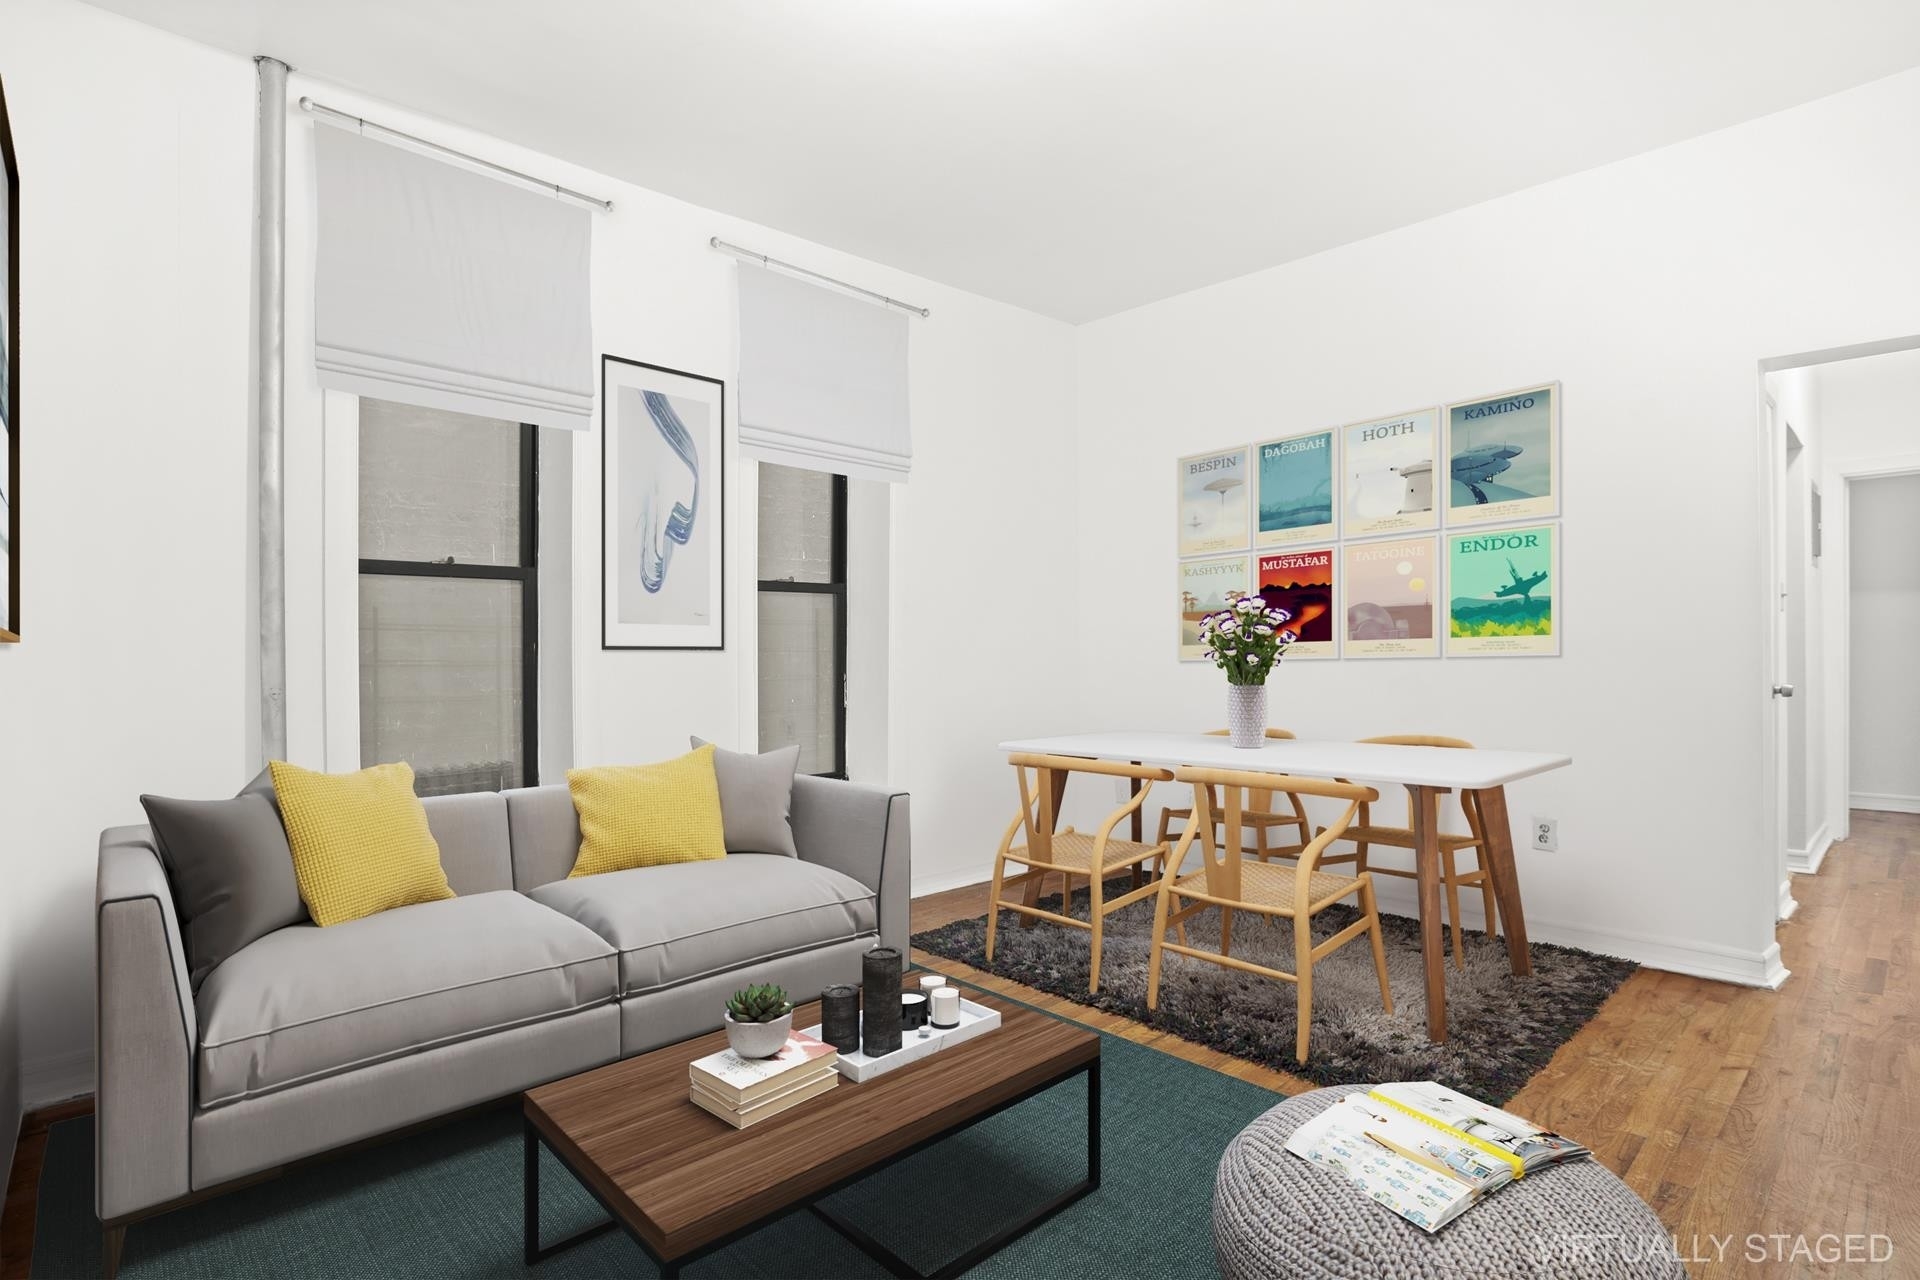 Property at 16 West 119th St, 1B New York